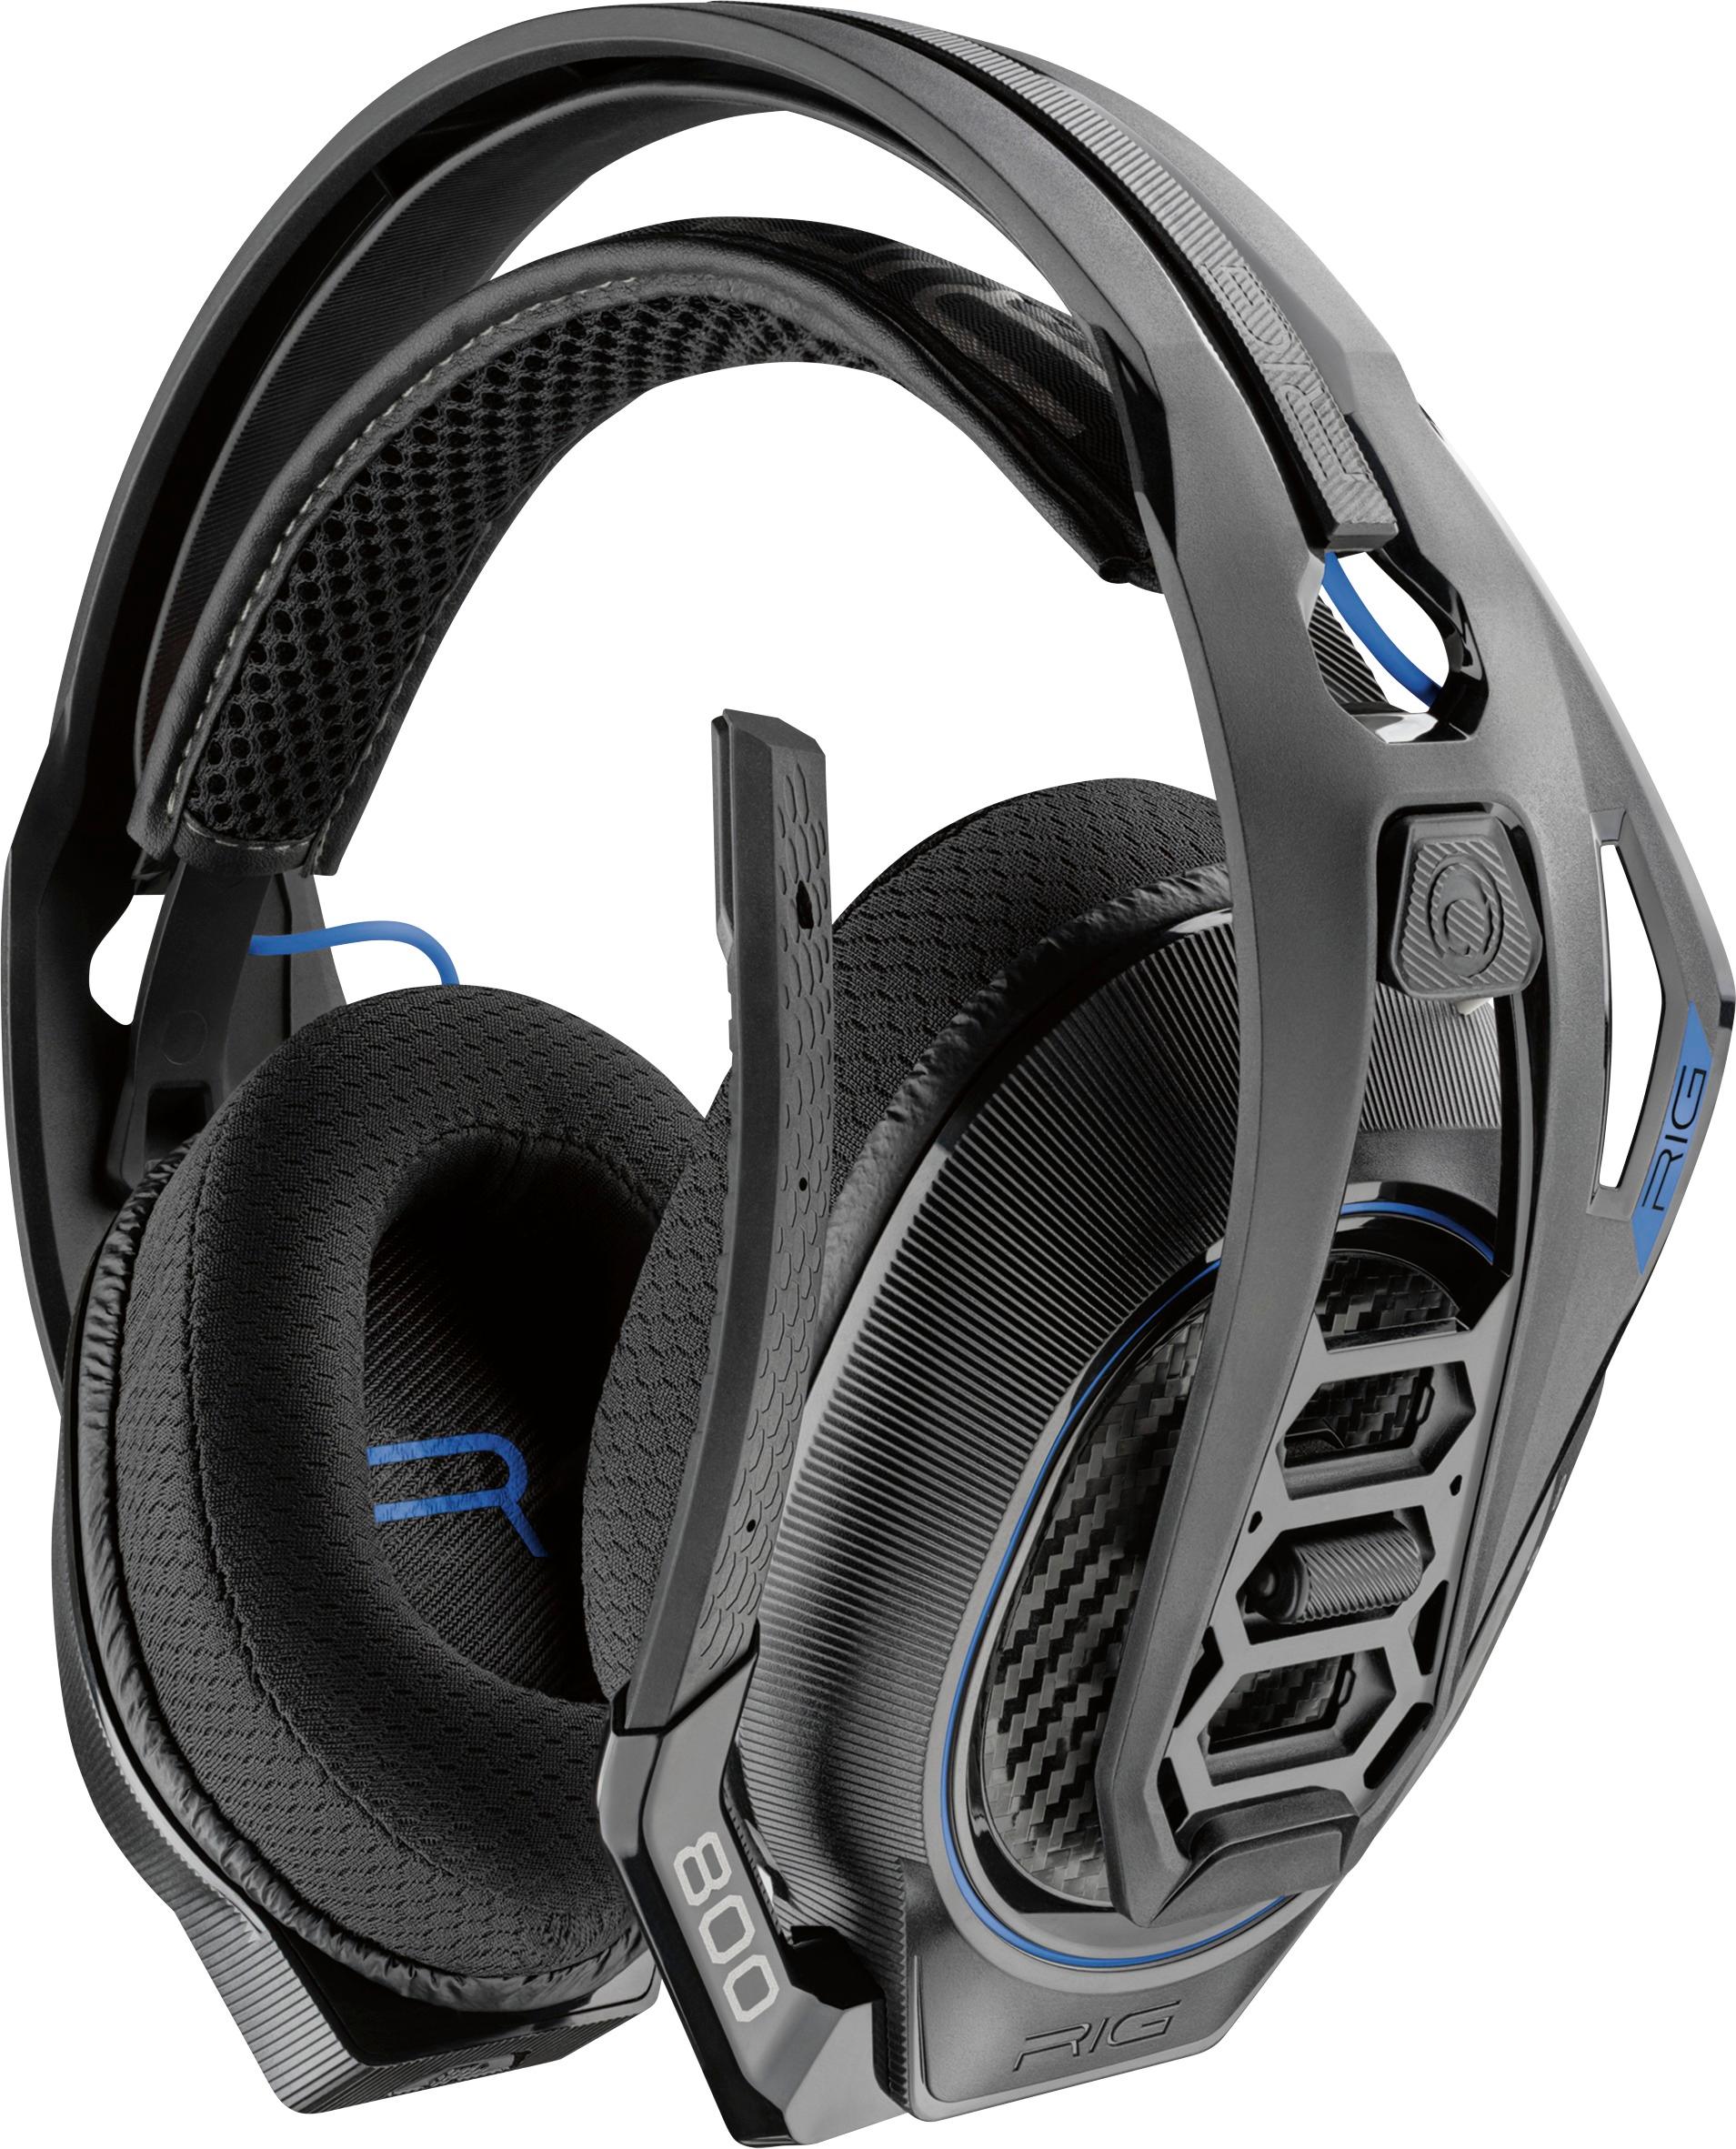 headset for ps4 near me